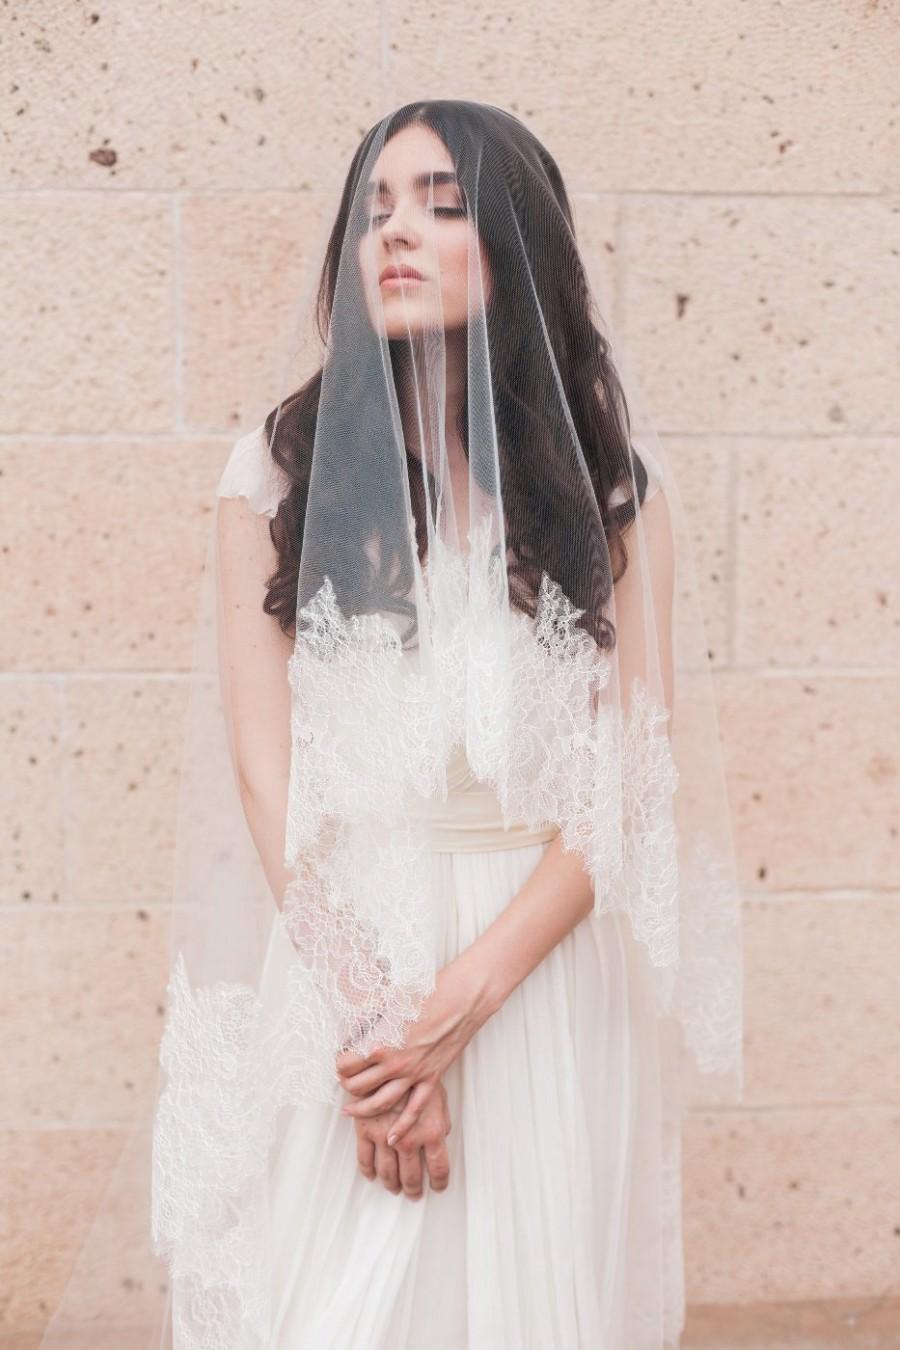 Wedding - NEW-Bridal mantilla veil-double layer veil-fingertip veil-drop veil-wedding veil-waltz veil-lace blusher veil-cathedral veil-style 190